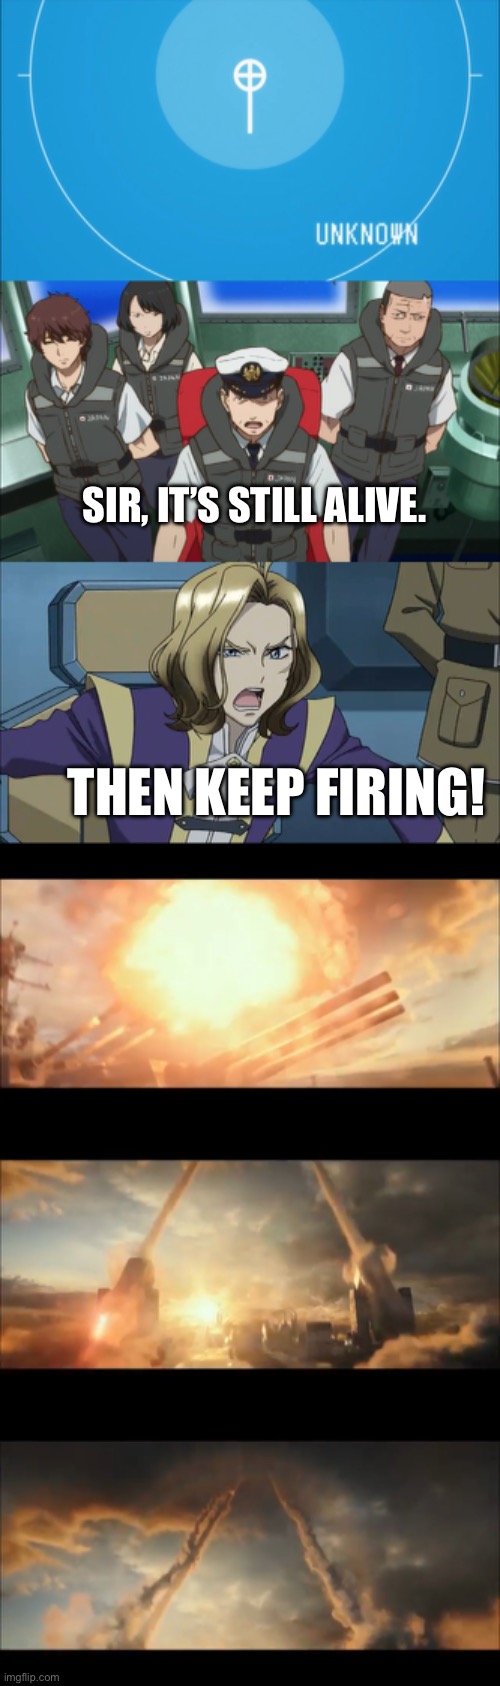 Julio and the Navy keep attacking | SIR, IT’S STILL ALIVE. THEN KEEP FIRING! | image tagged in anime | made w/ Imgflip meme maker